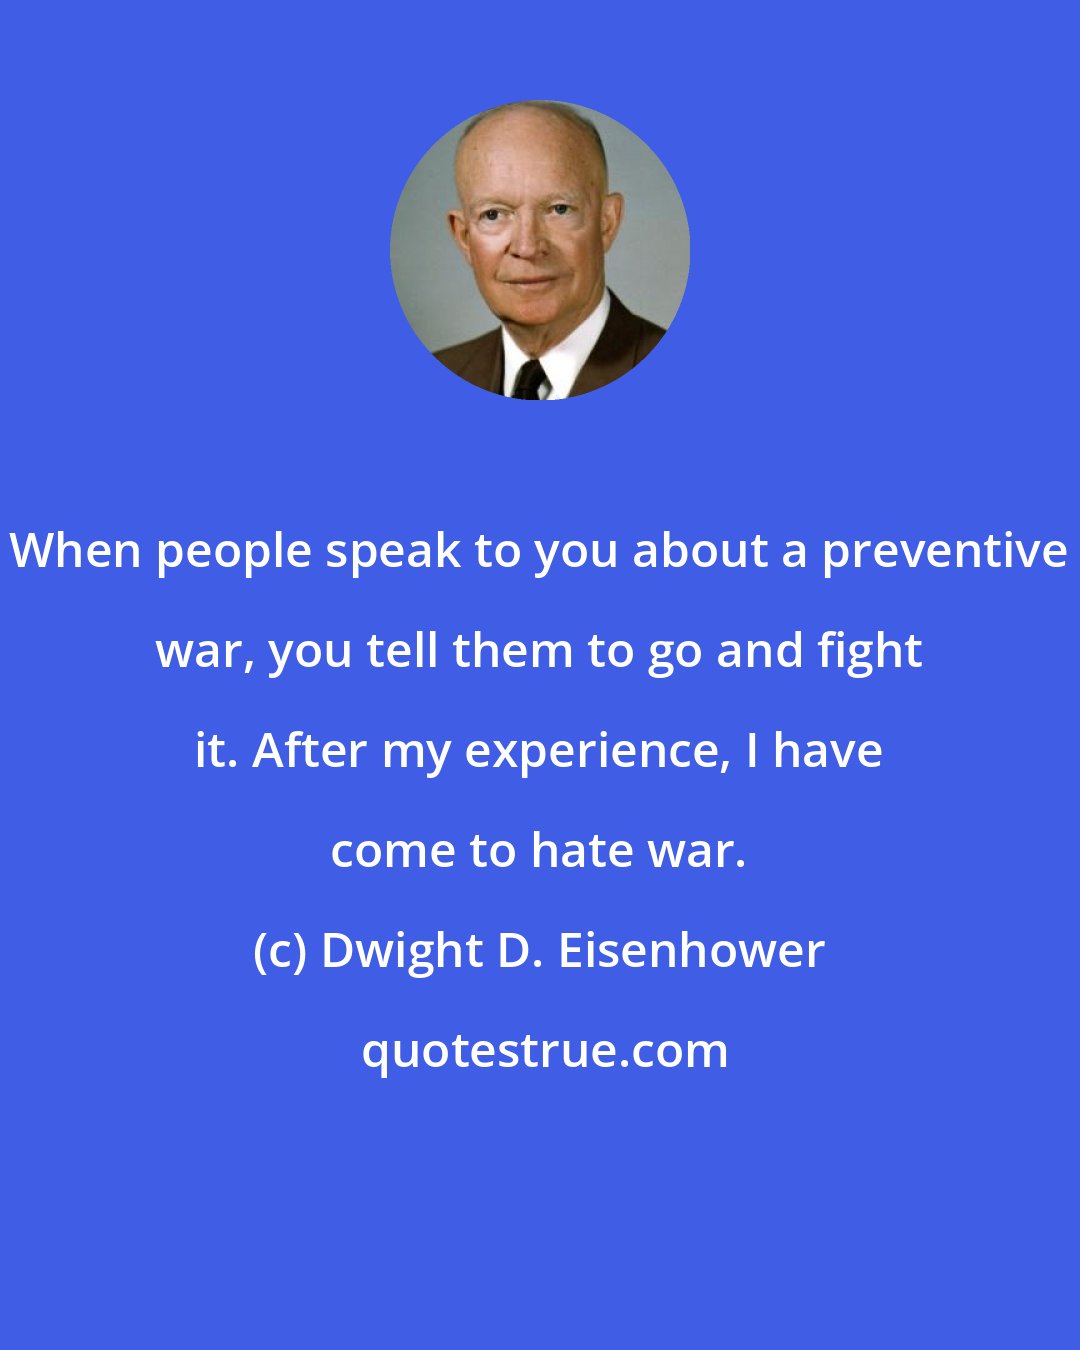 Dwight D. Eisenhower: When people speak to you about a preventive war, you tell them to go and fight it. After my experience, I have come to hate war.